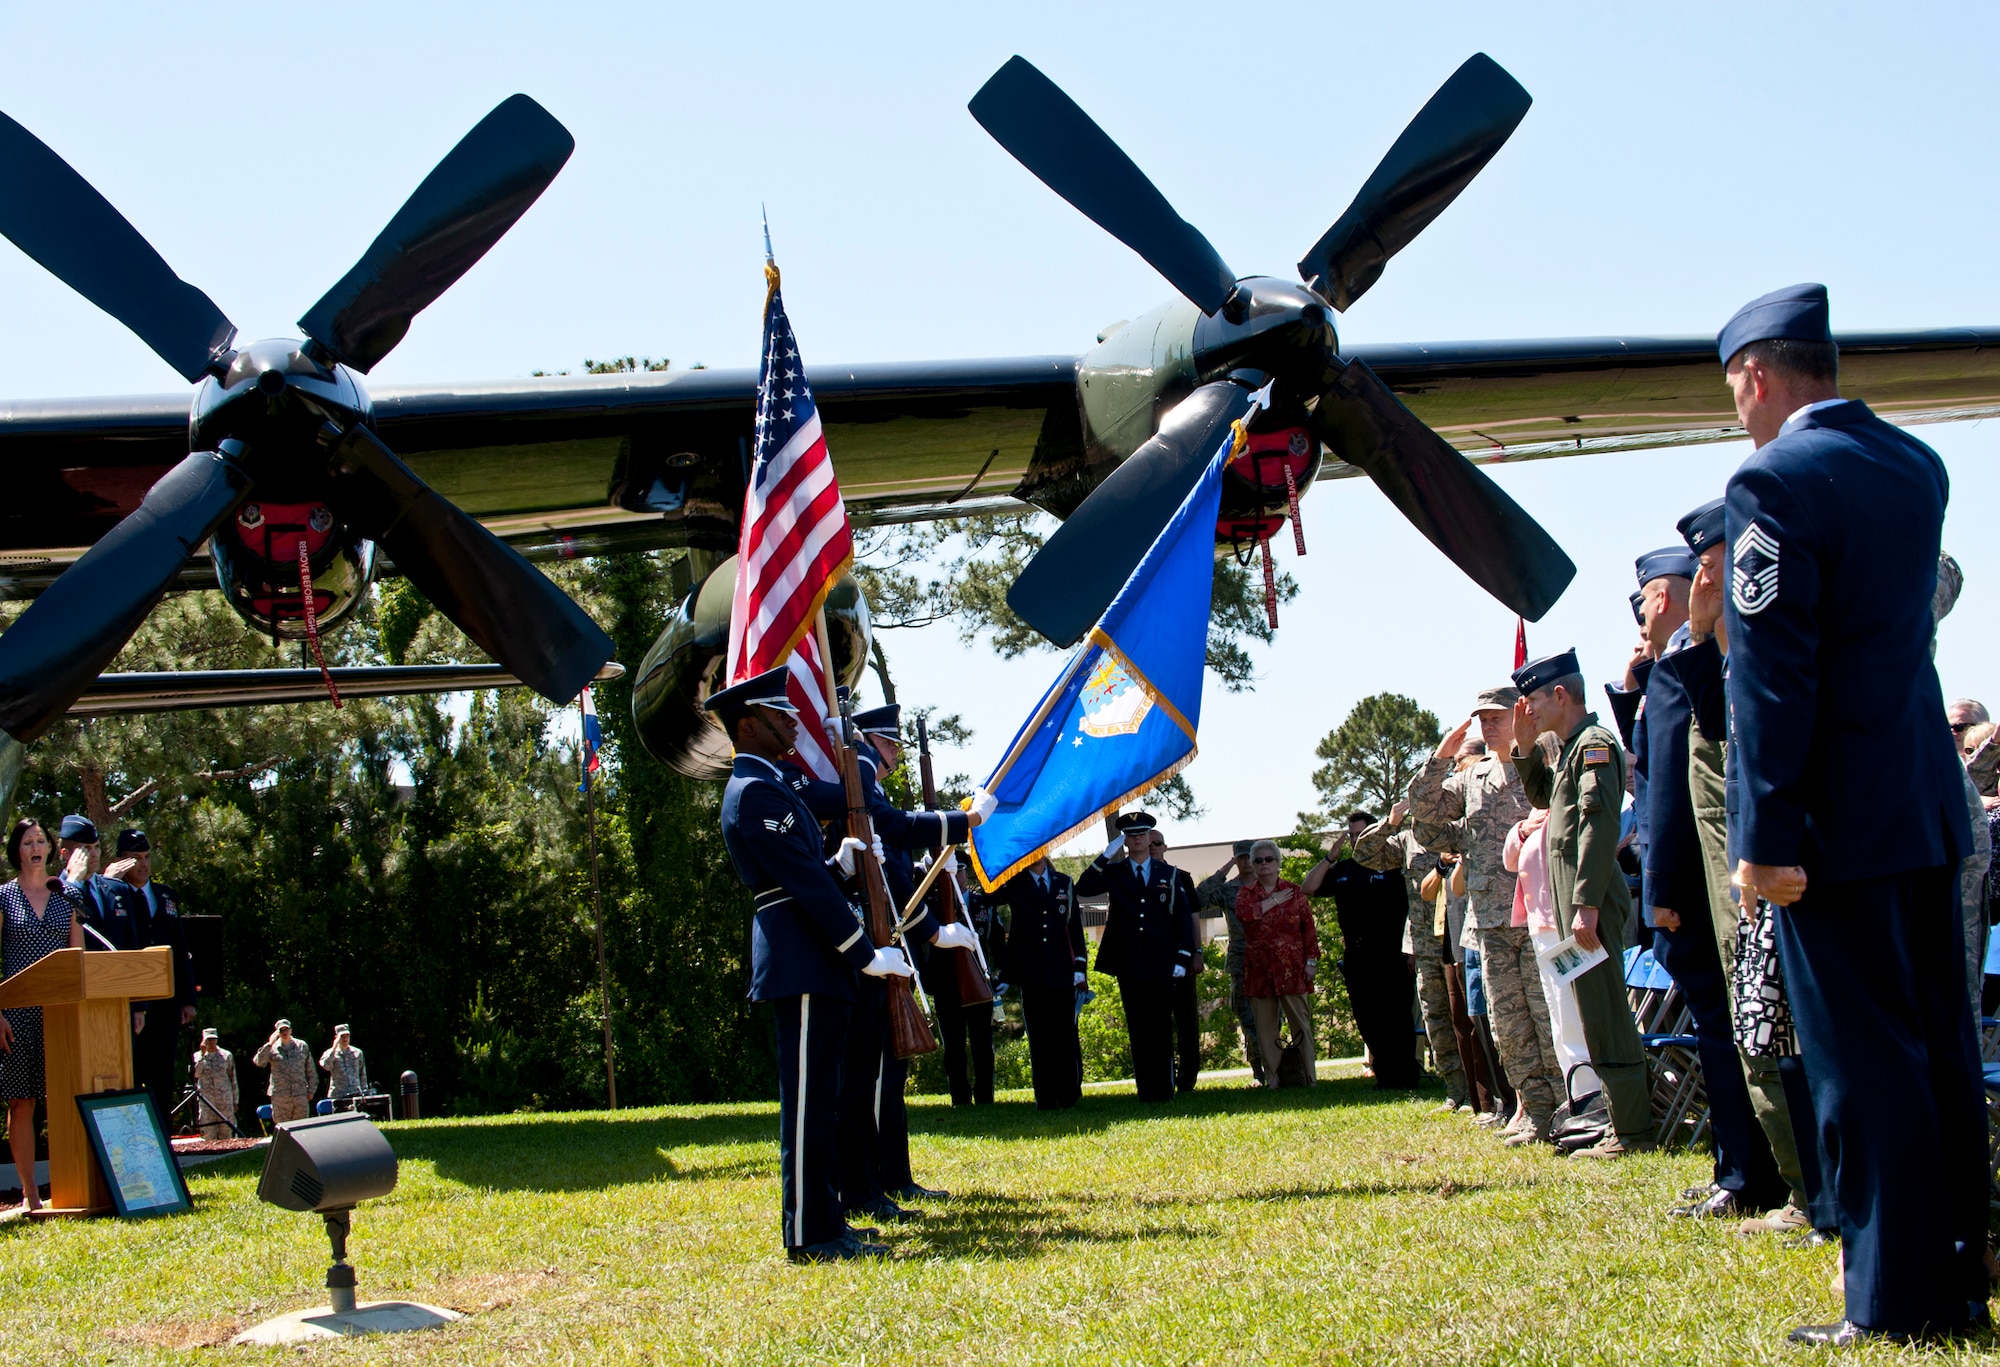 Hurlburt Field Honor Guard Airmen present the colors in the shadow of Combat Talon 64-567 during its dedication ceremony at the Hurlburt Field airpark May 6.  The Talon known as “Wild Thing” had a 46-year Air Force career and 22,336.5 flight hours.  (U.S. Air Force photo/Tech. Sgt. Samuel King Jr.)